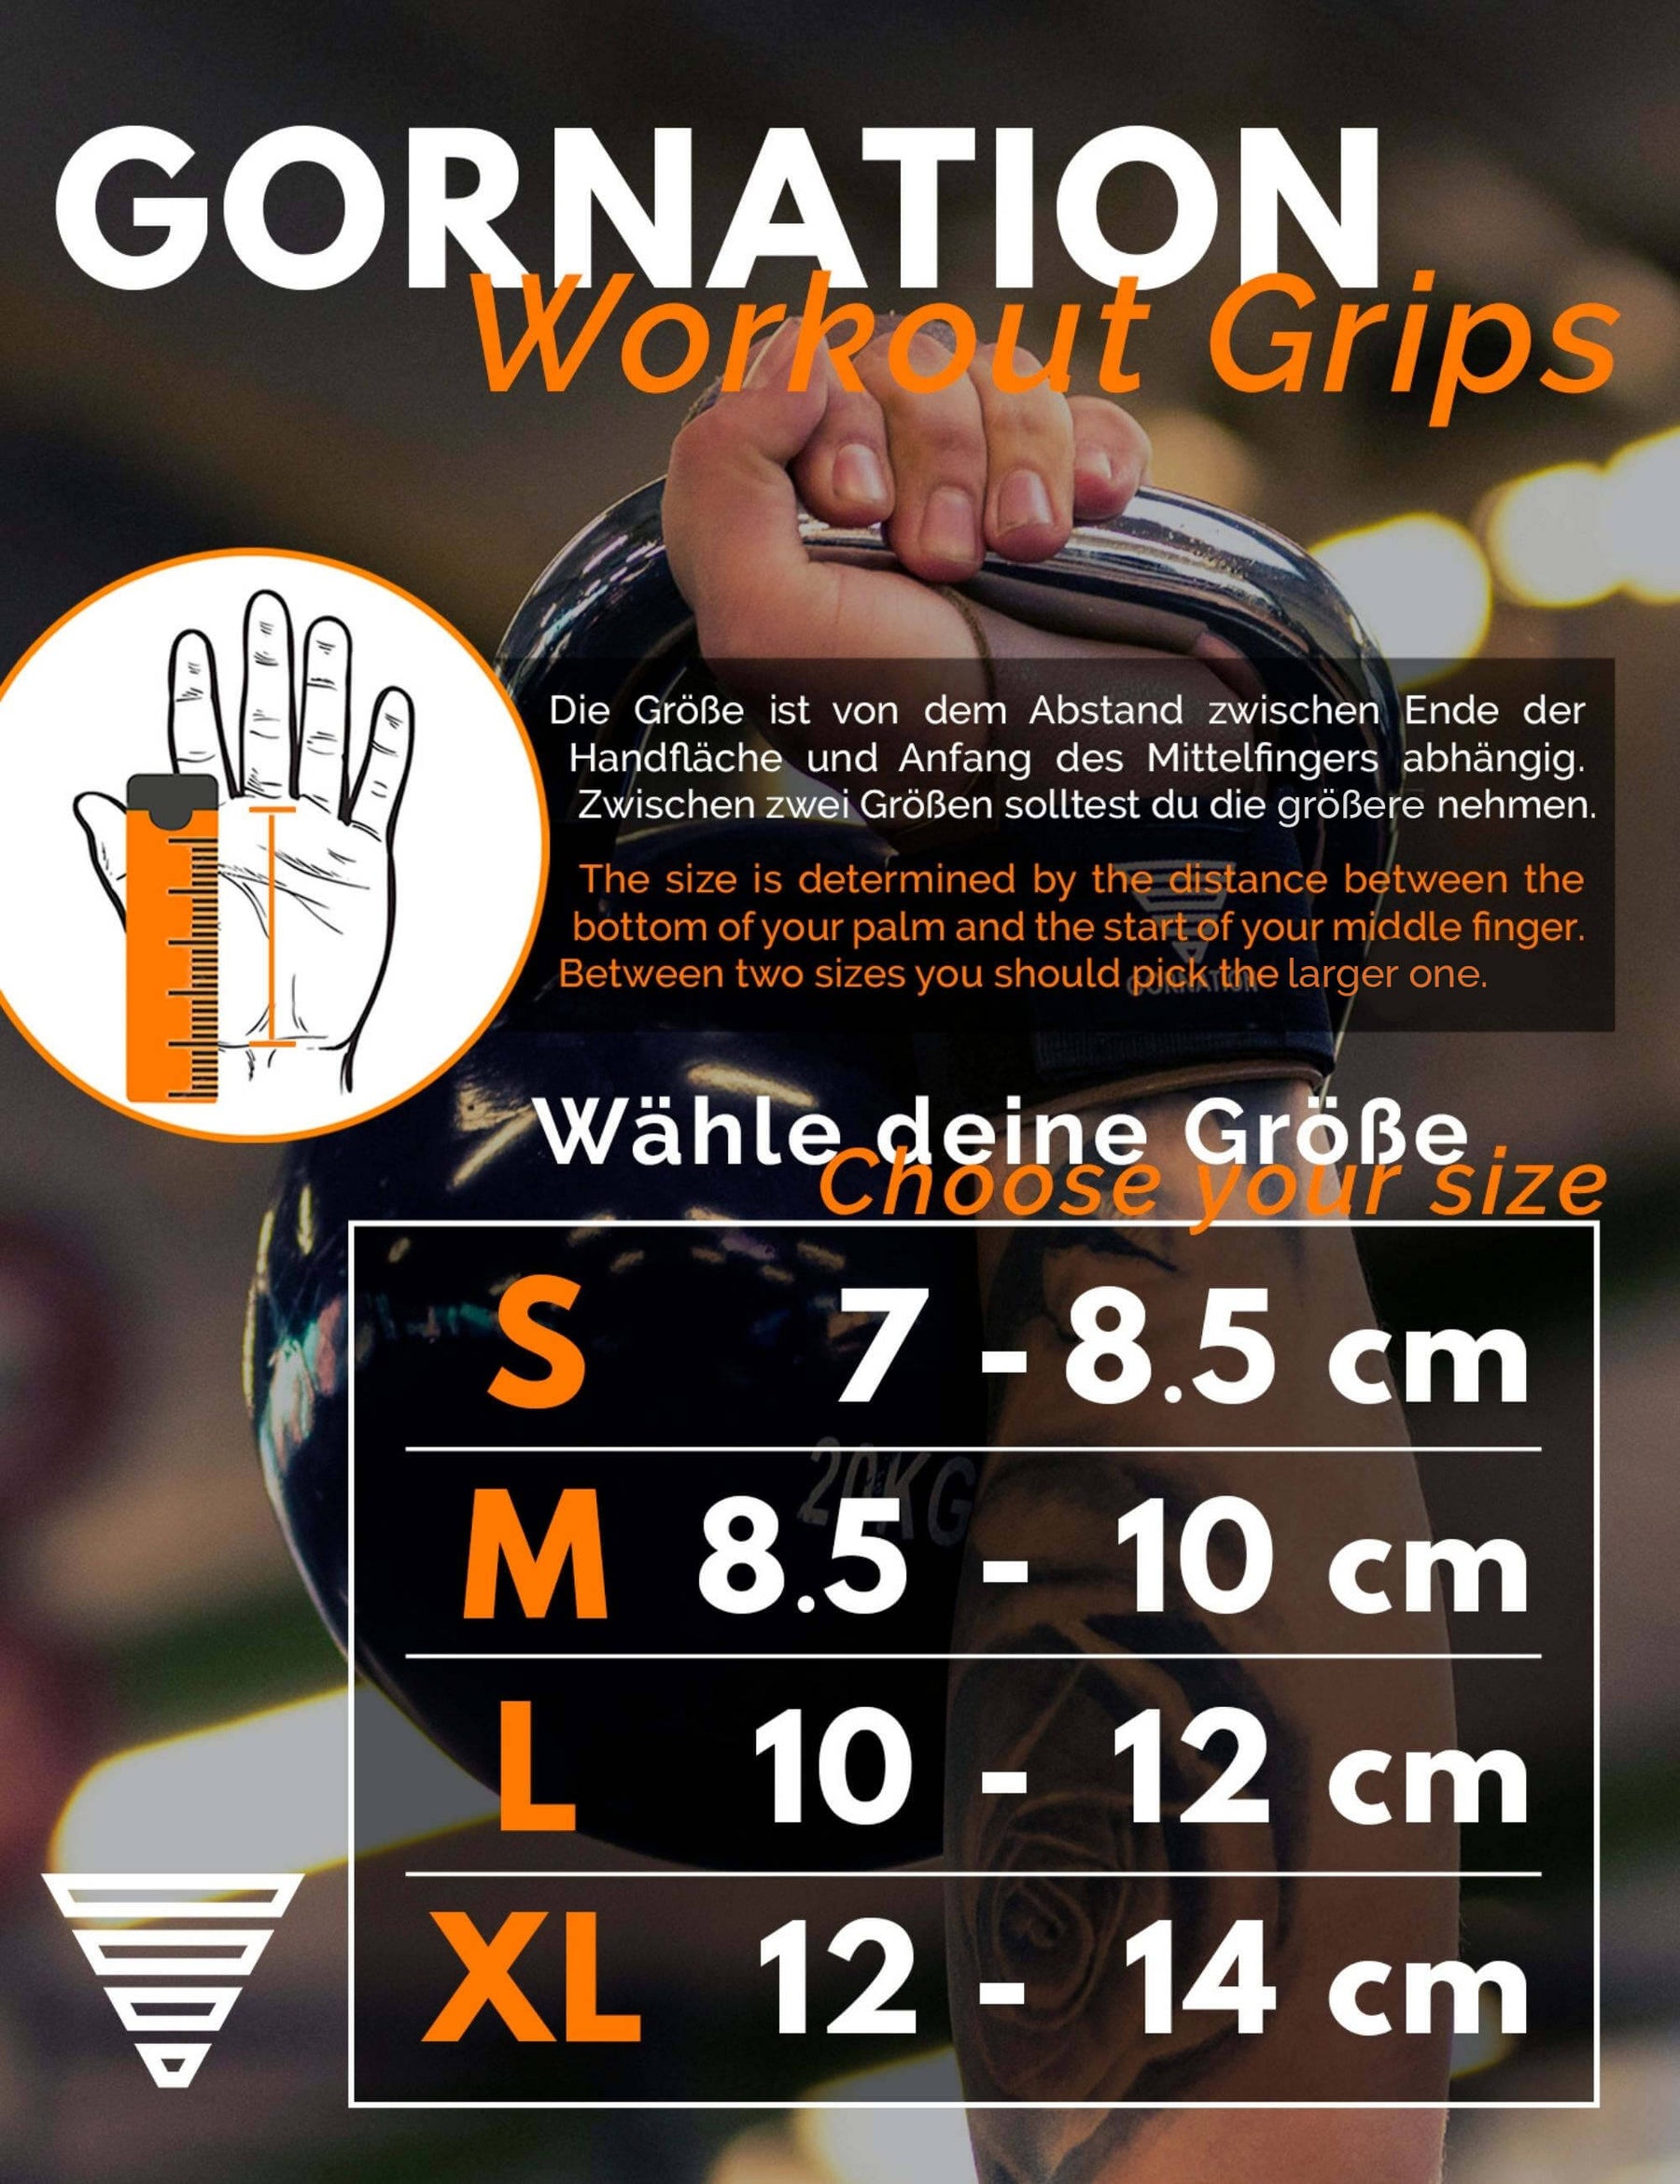 Workout Grips Carbon